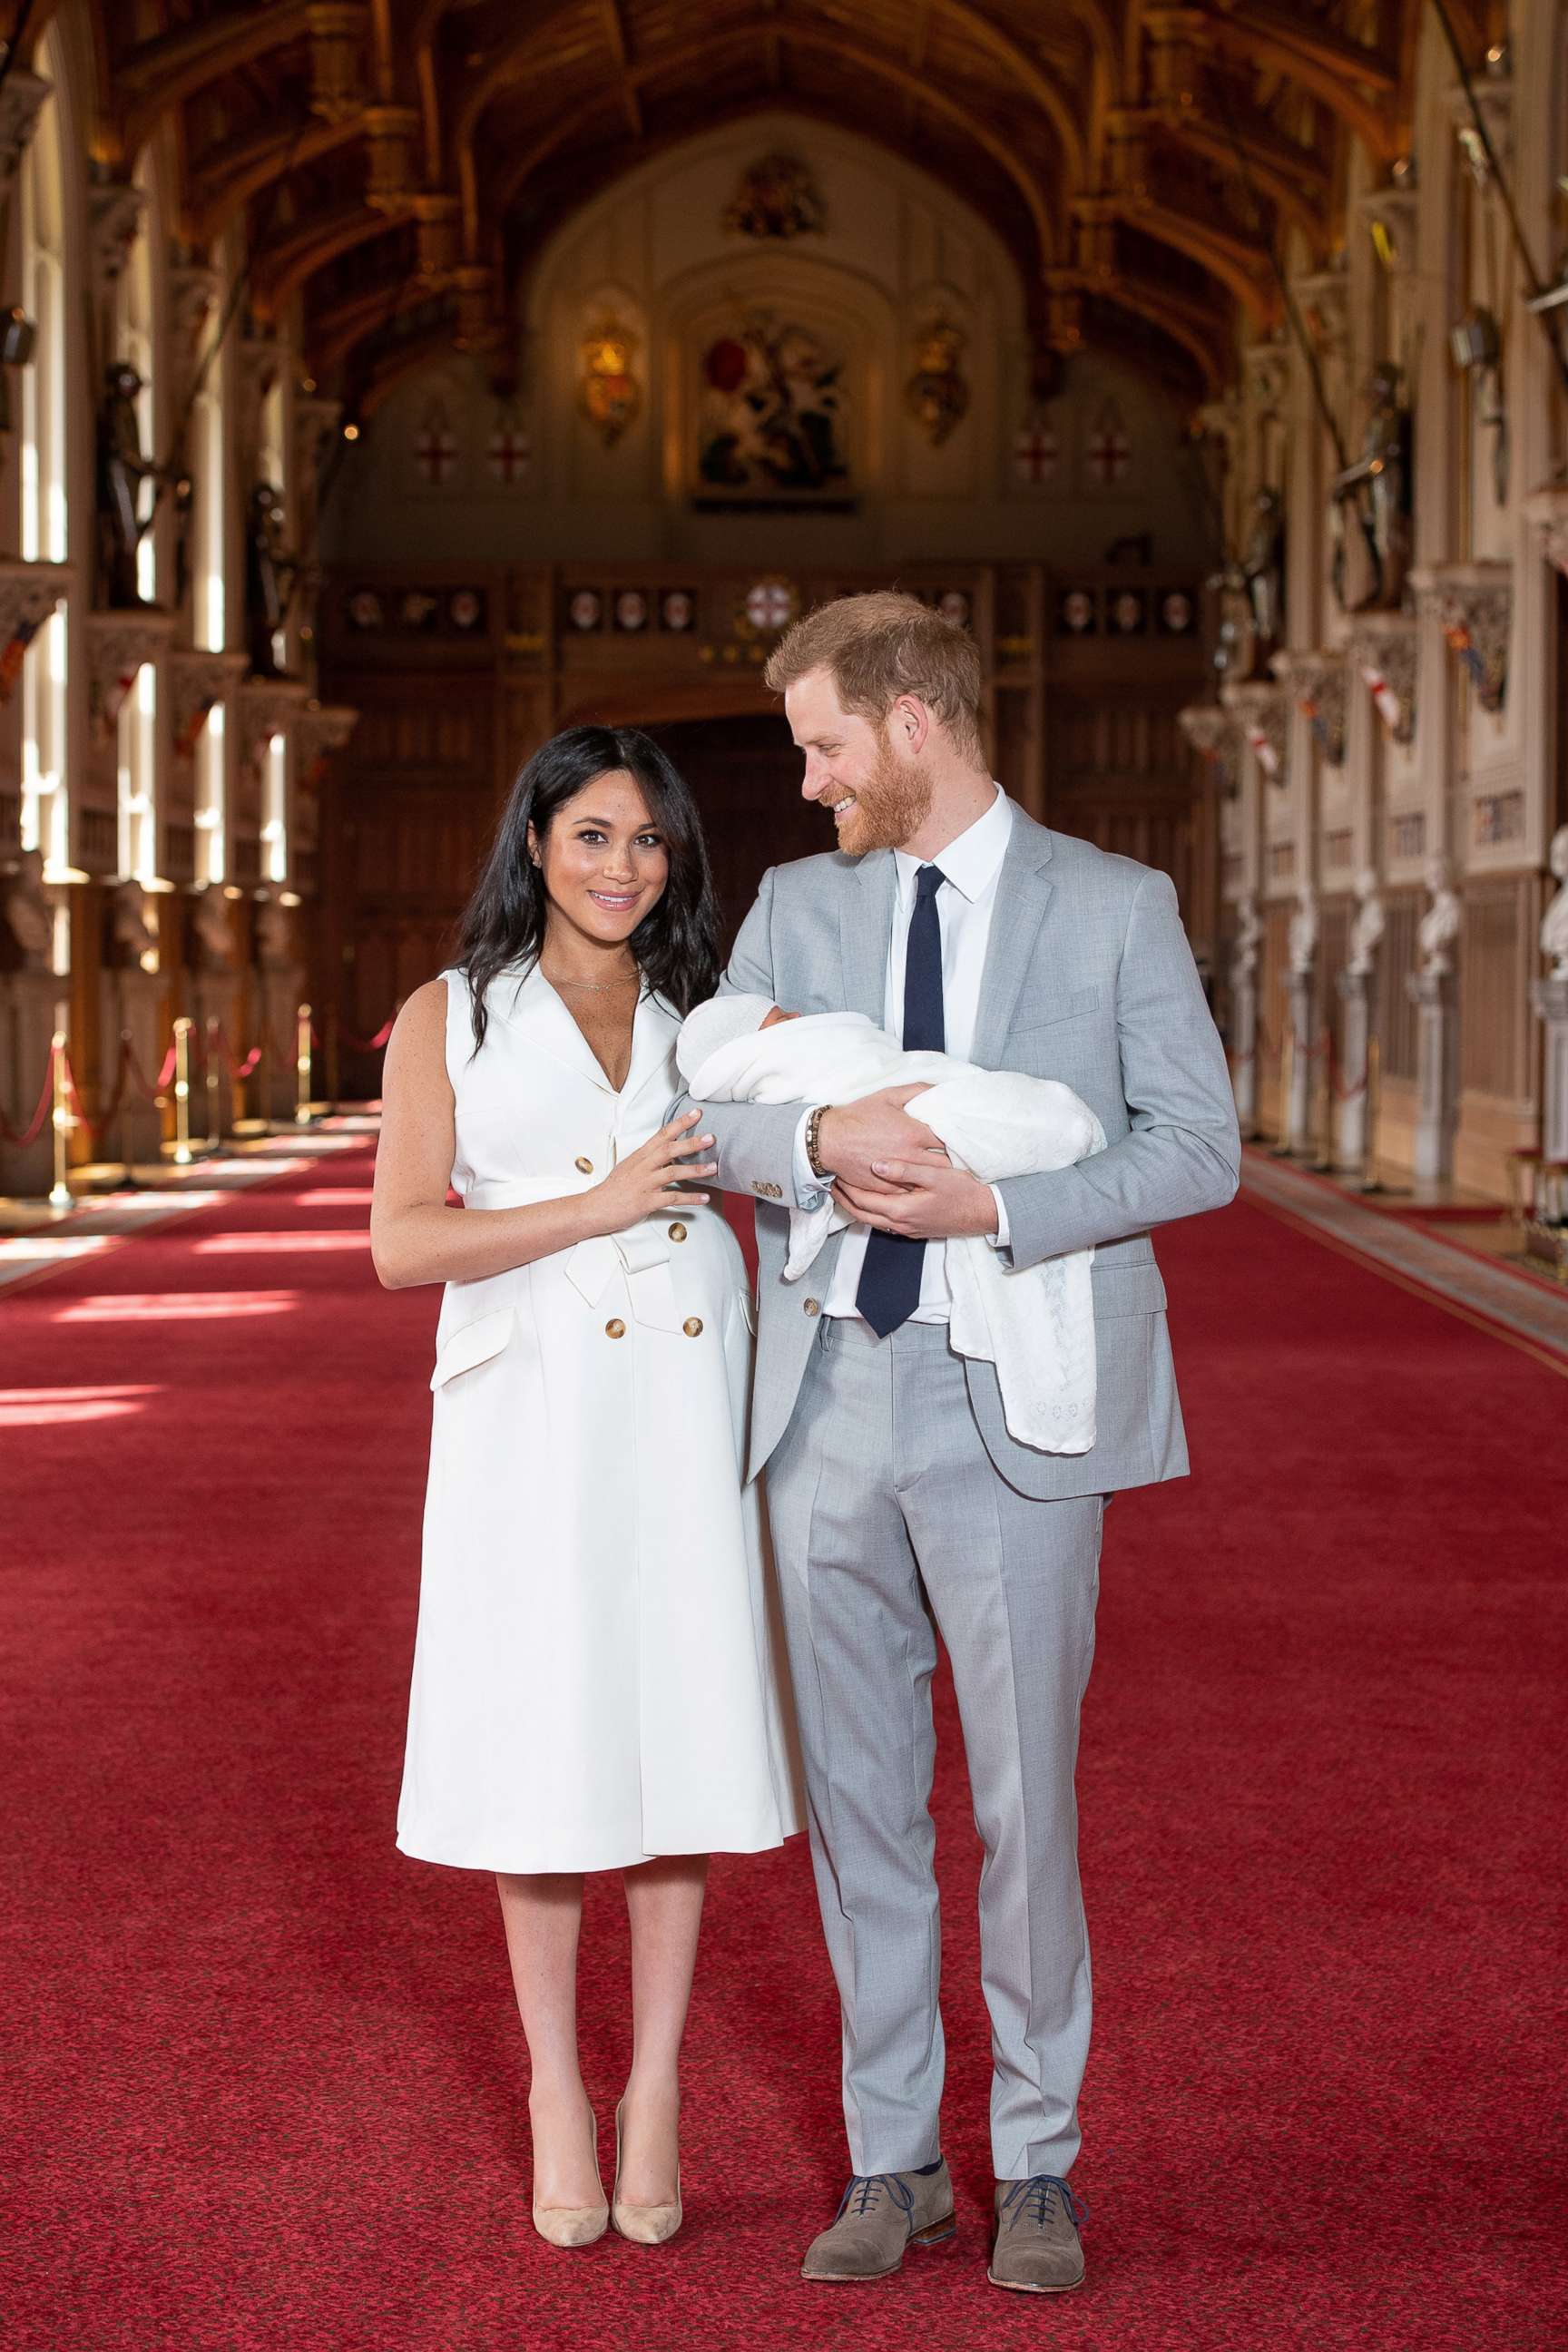 PHOTO:Britain's Prince Harry and Meghan, Duchess of Sussex, hold their newborn baby son in St George's Hall at Windsor Castle, in Windsor, England, May 8, 2019.